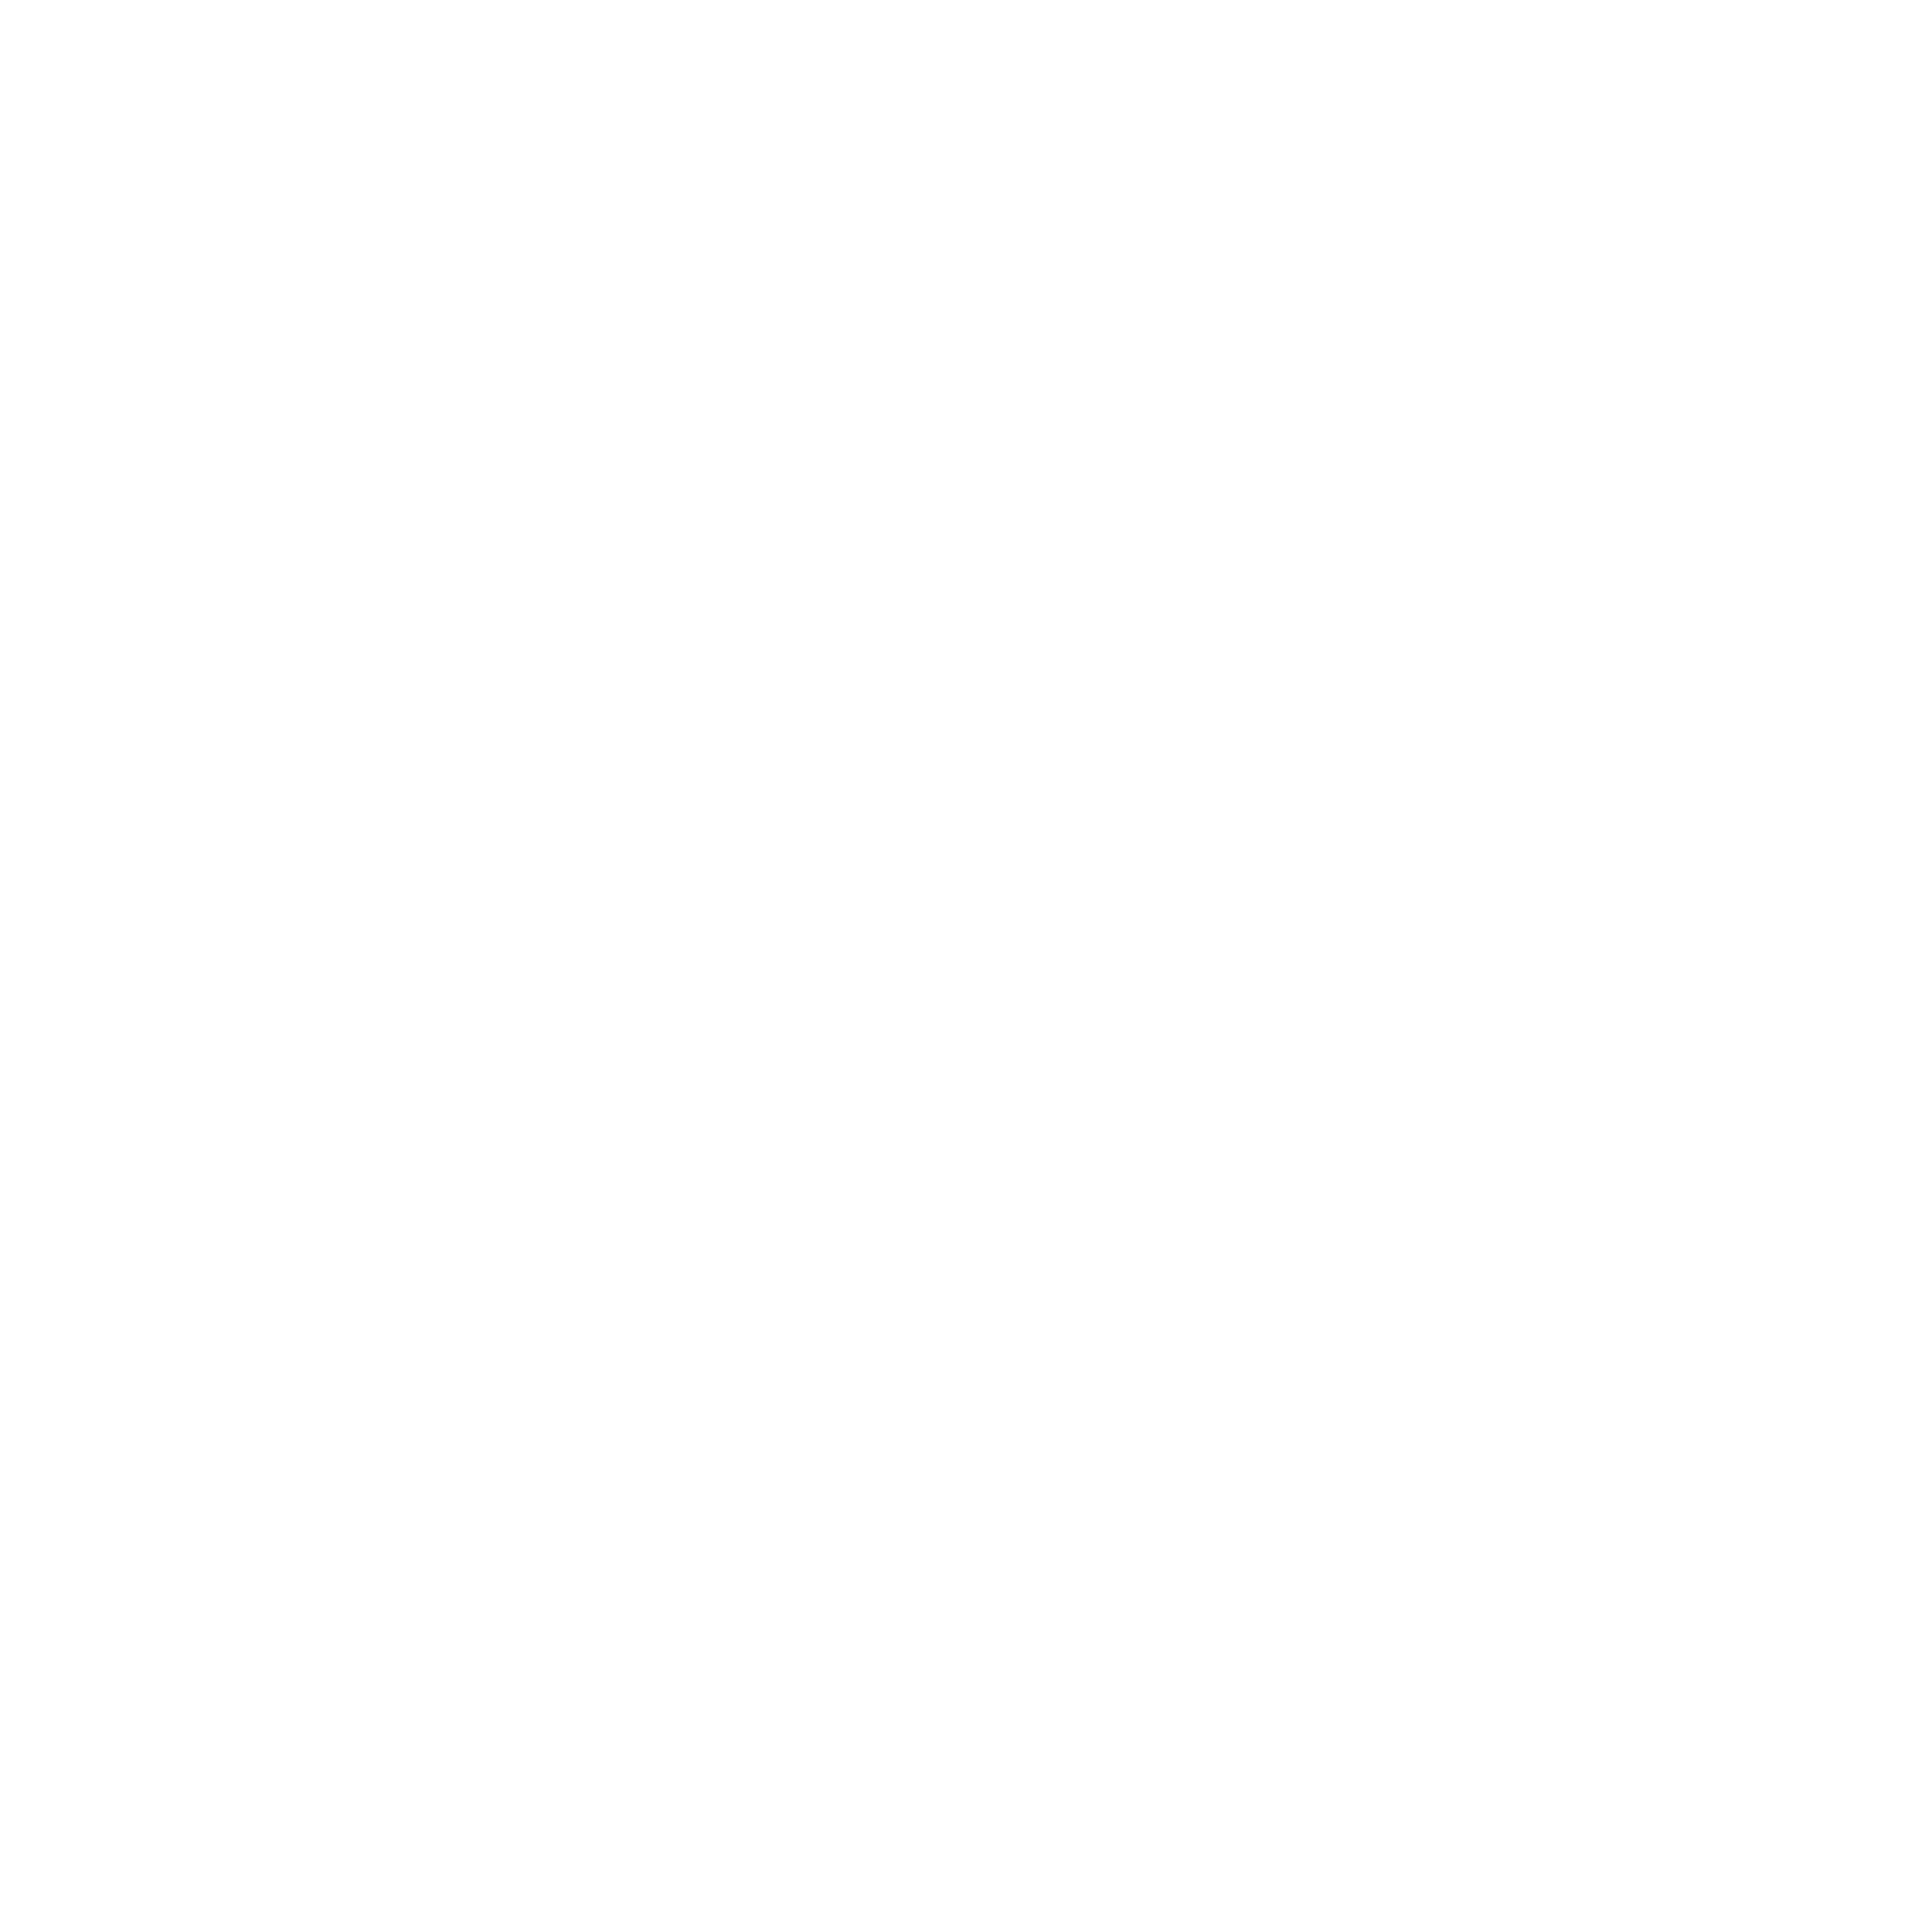 QWERTY Beer Box